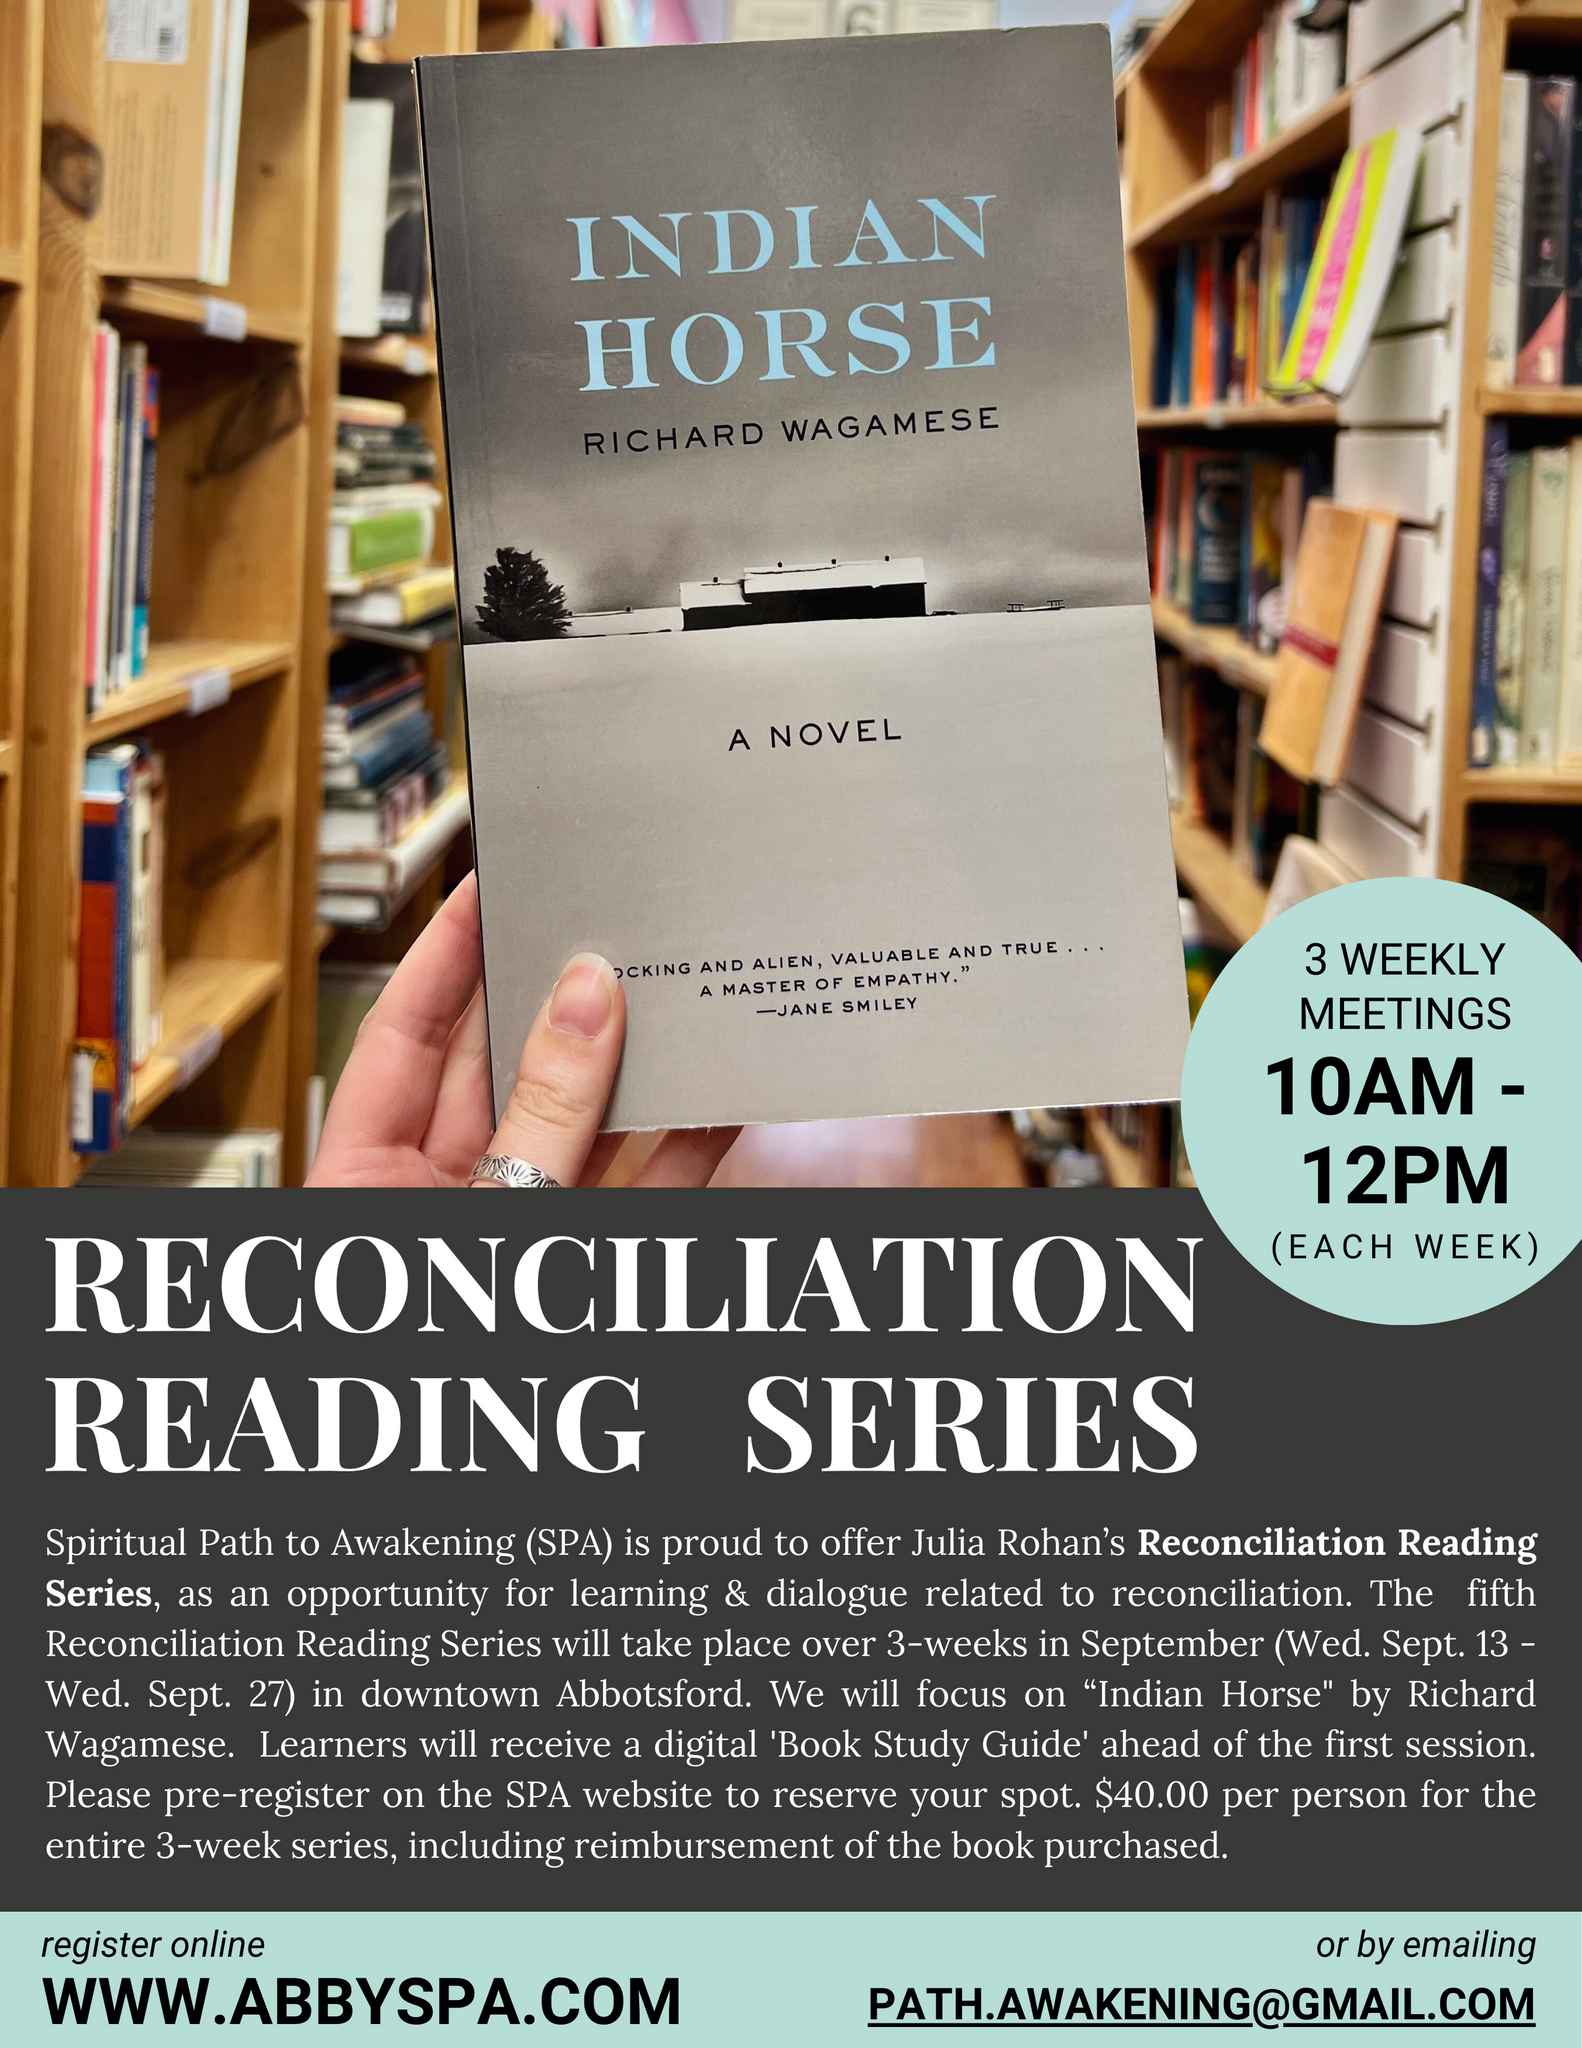 Reconciliation Reading Series (#5): “Indian Horse”